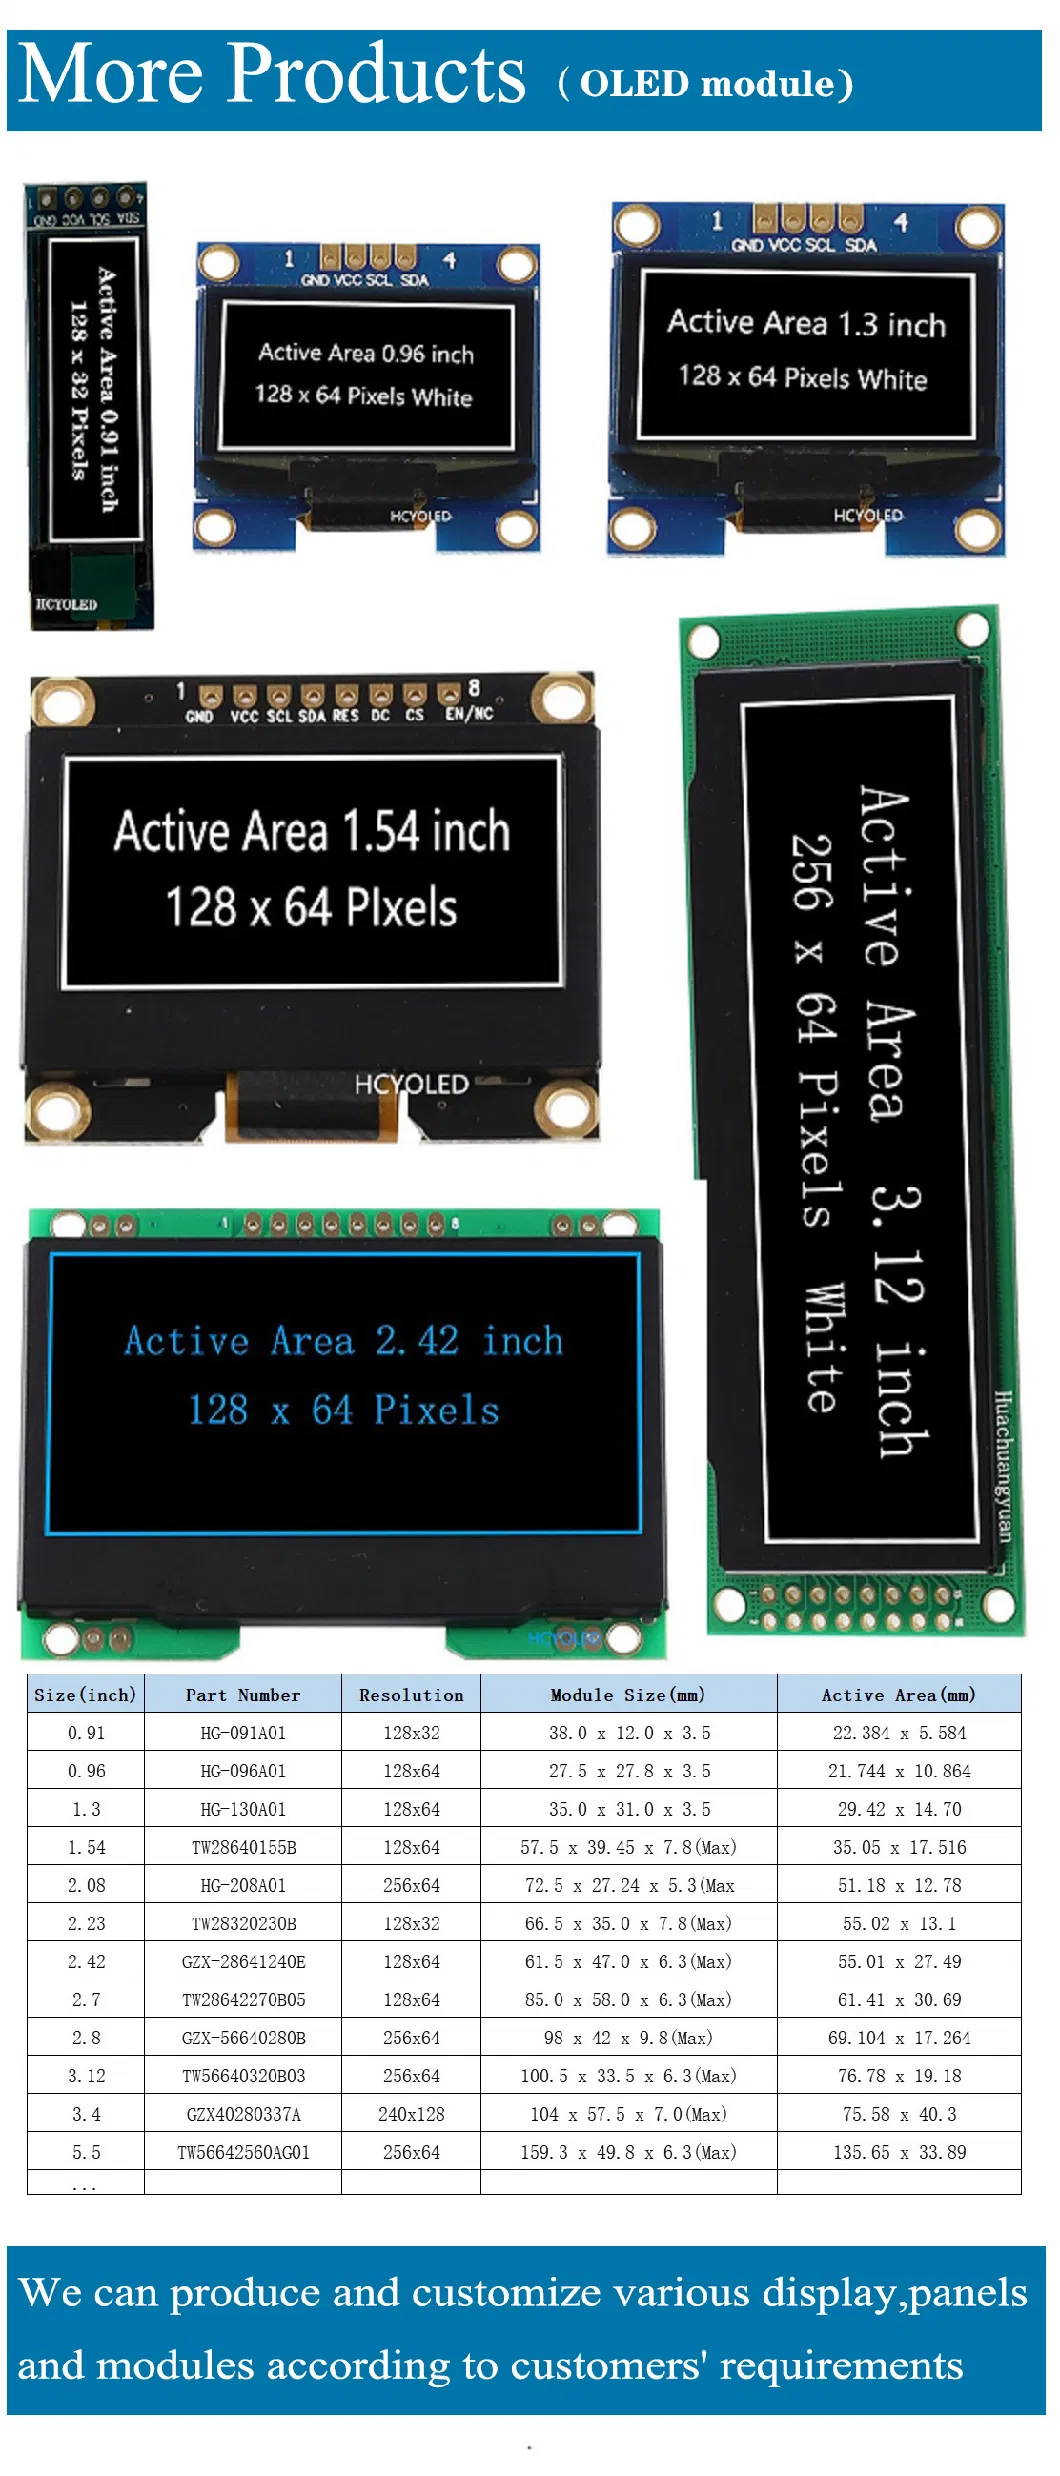 0.5 Inch Tiny OLED Display with 88X48 Resolution, Transparent OLED Panel, Amoled